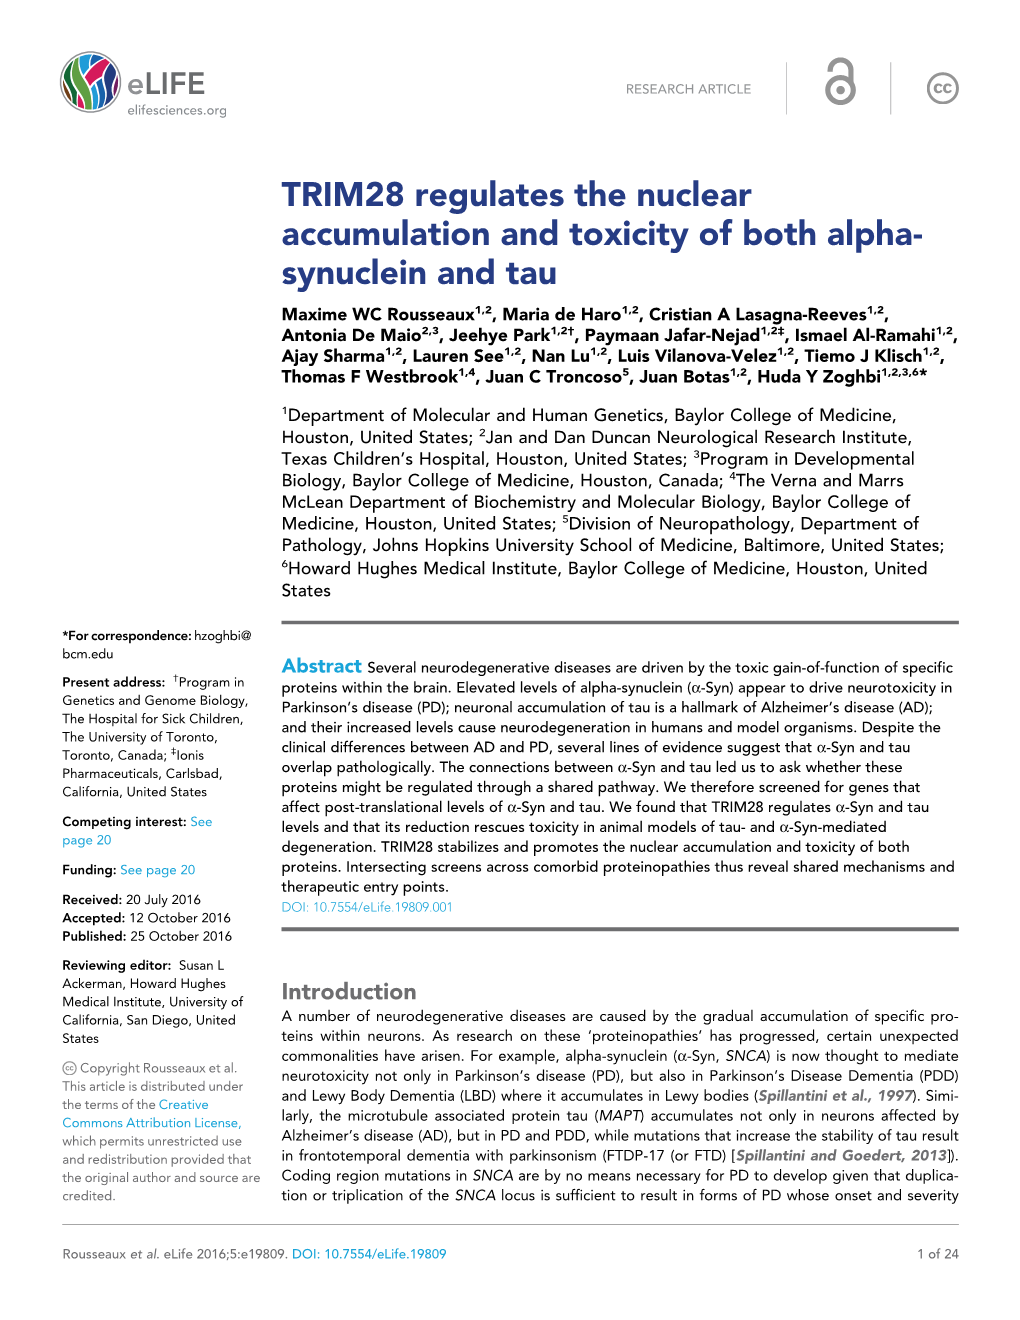 TRIM28 Regulates the Nuclear Accumulation and Toxicity of Both